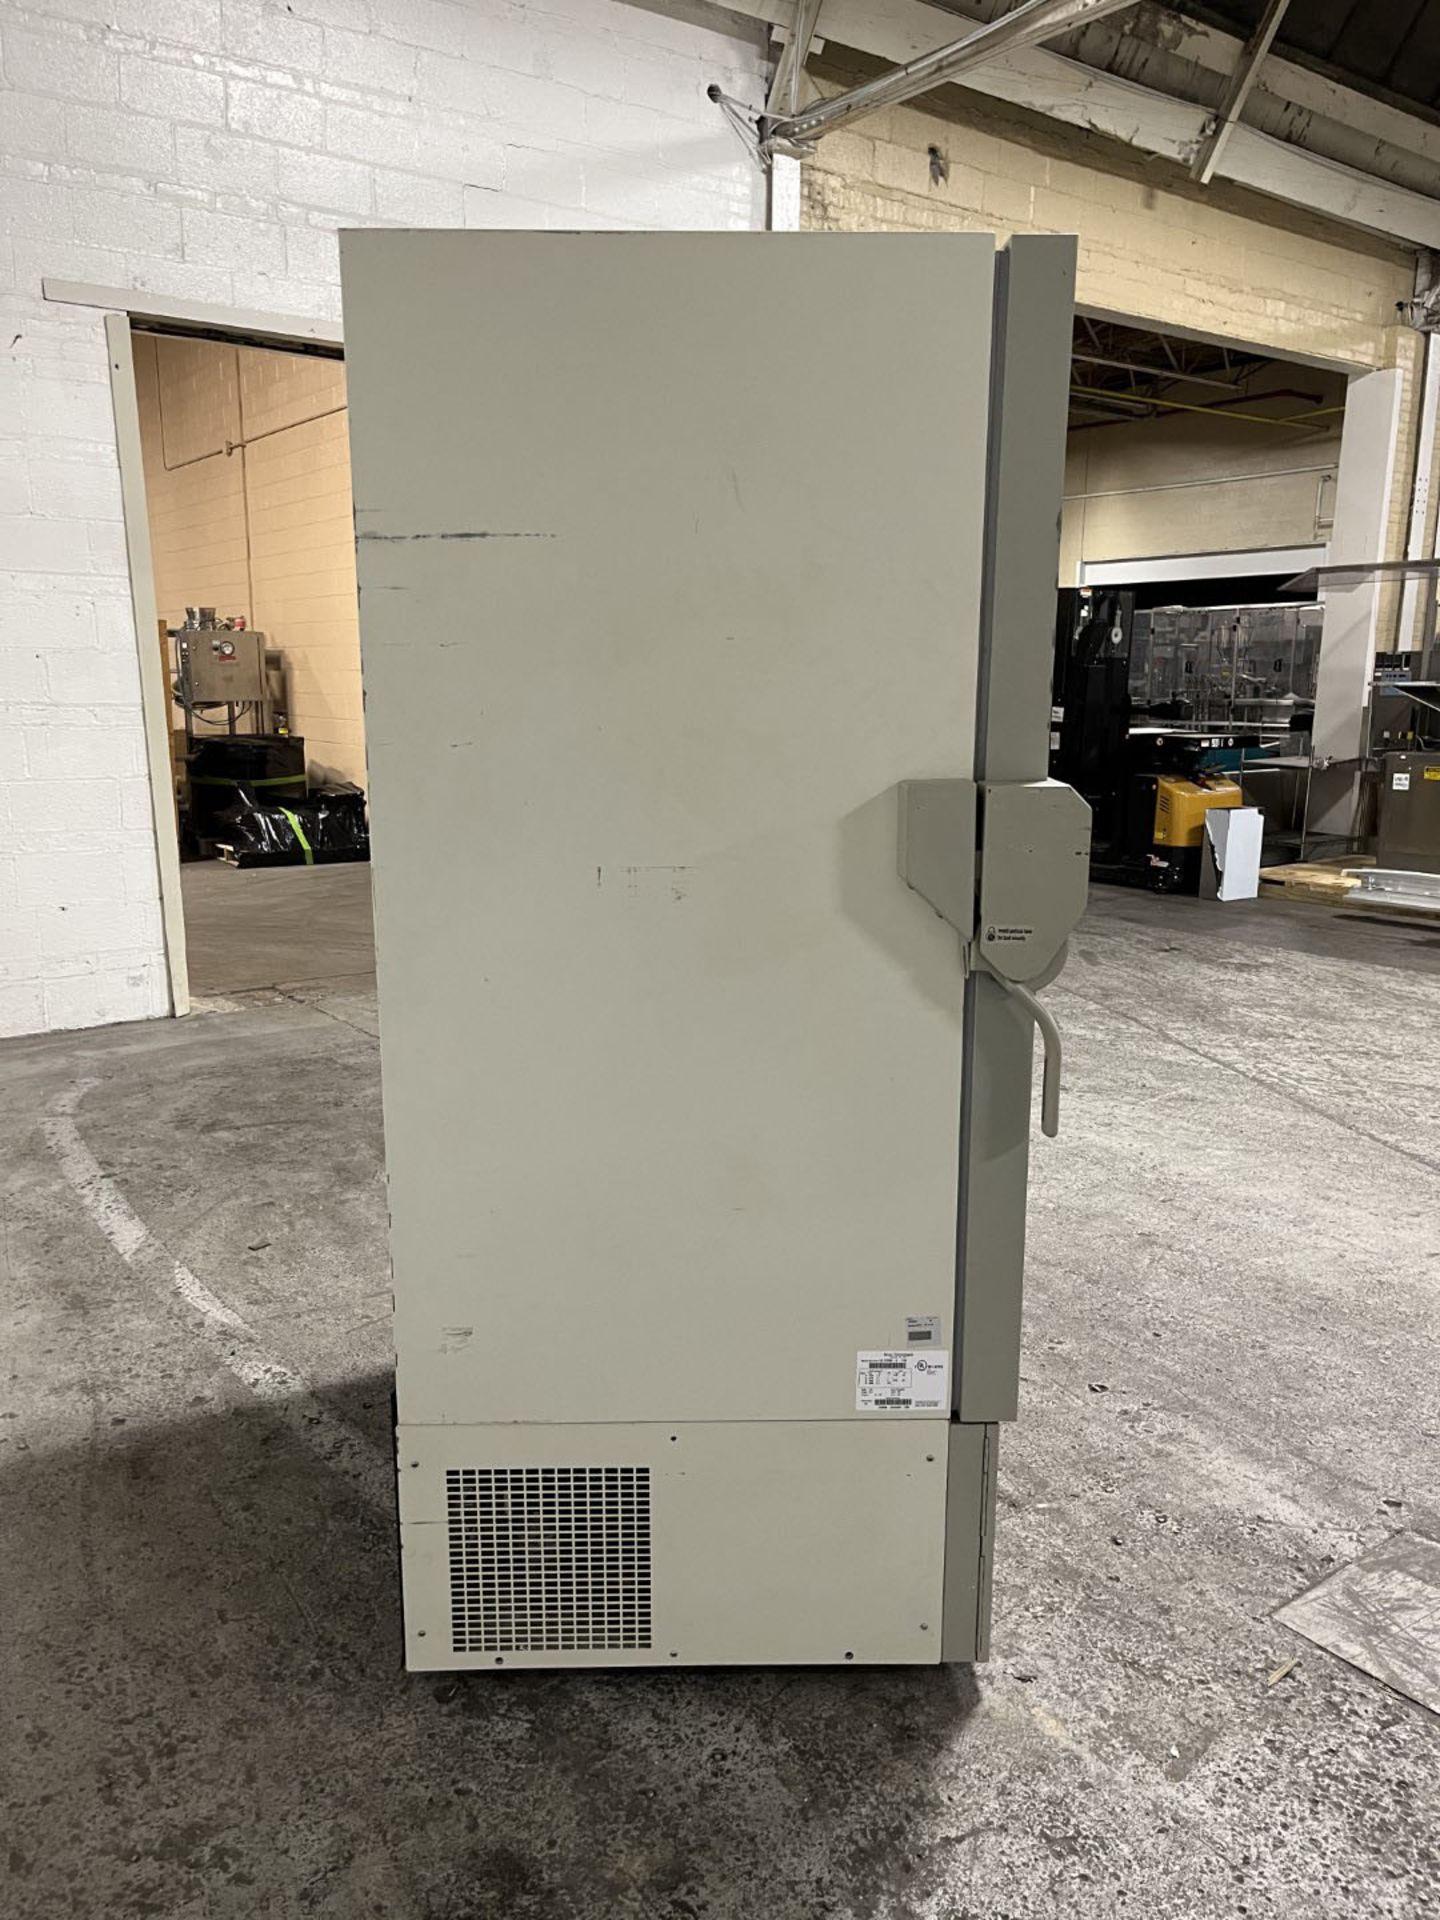 Revco Ultra Low Temperature Freezer, Model ULT2586-5-A35 - Image 4 of 8